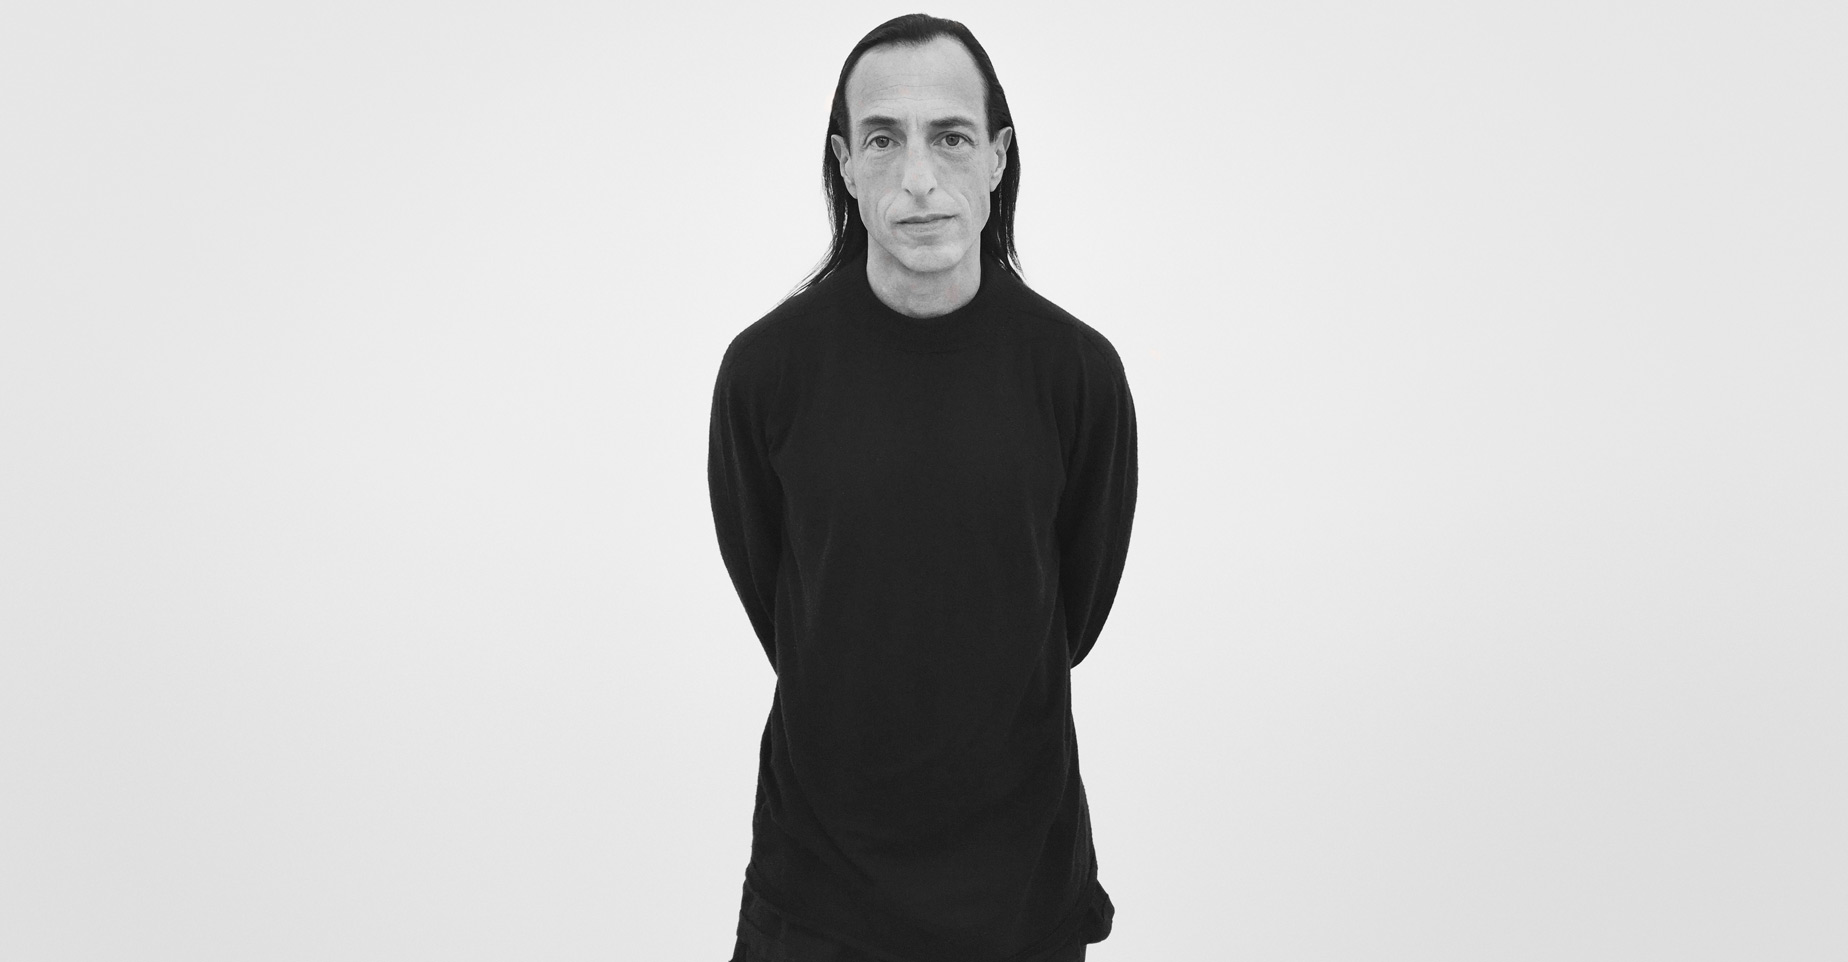 The 2017 CFDA Awards Nominees Include Rick Owens and Virgil Abloh